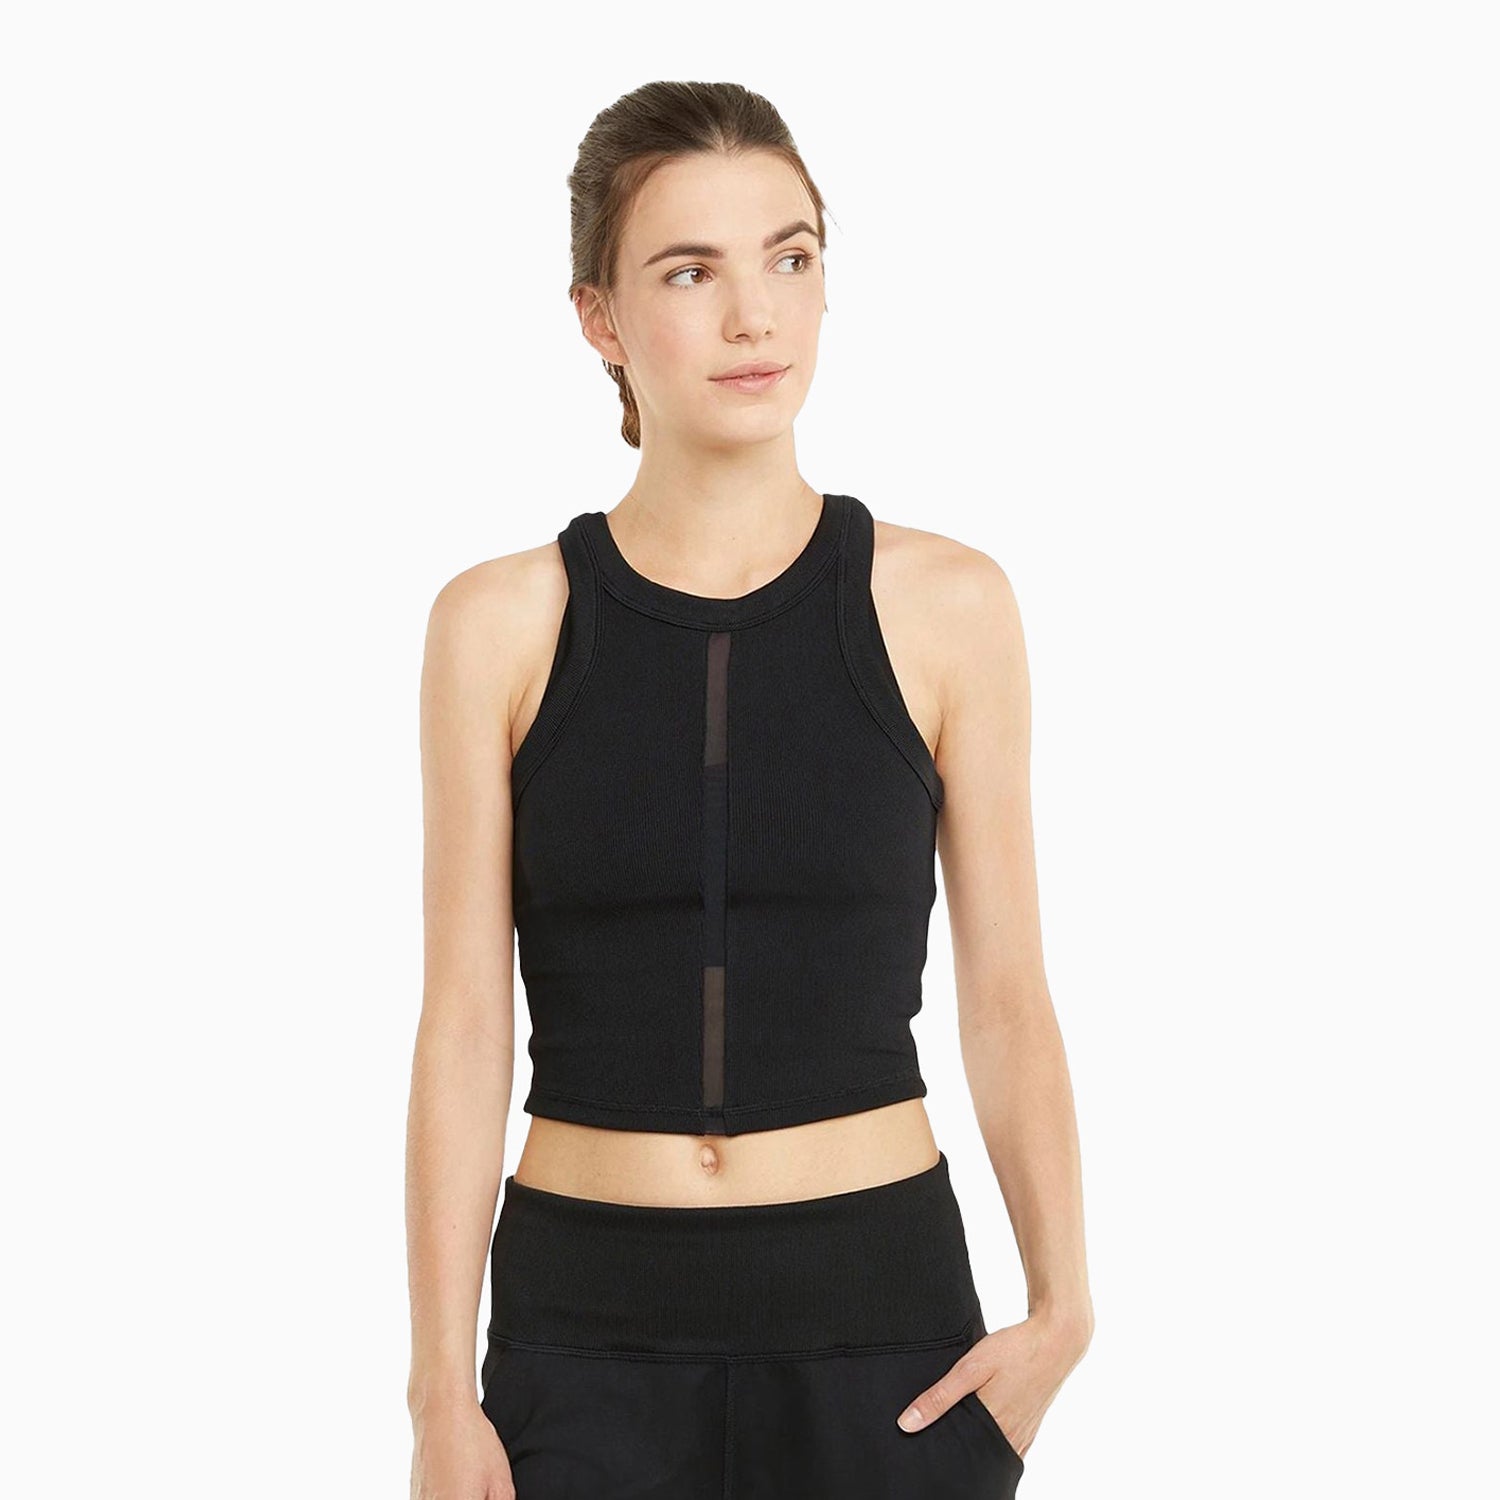 Women's Exhale Rib Outfit